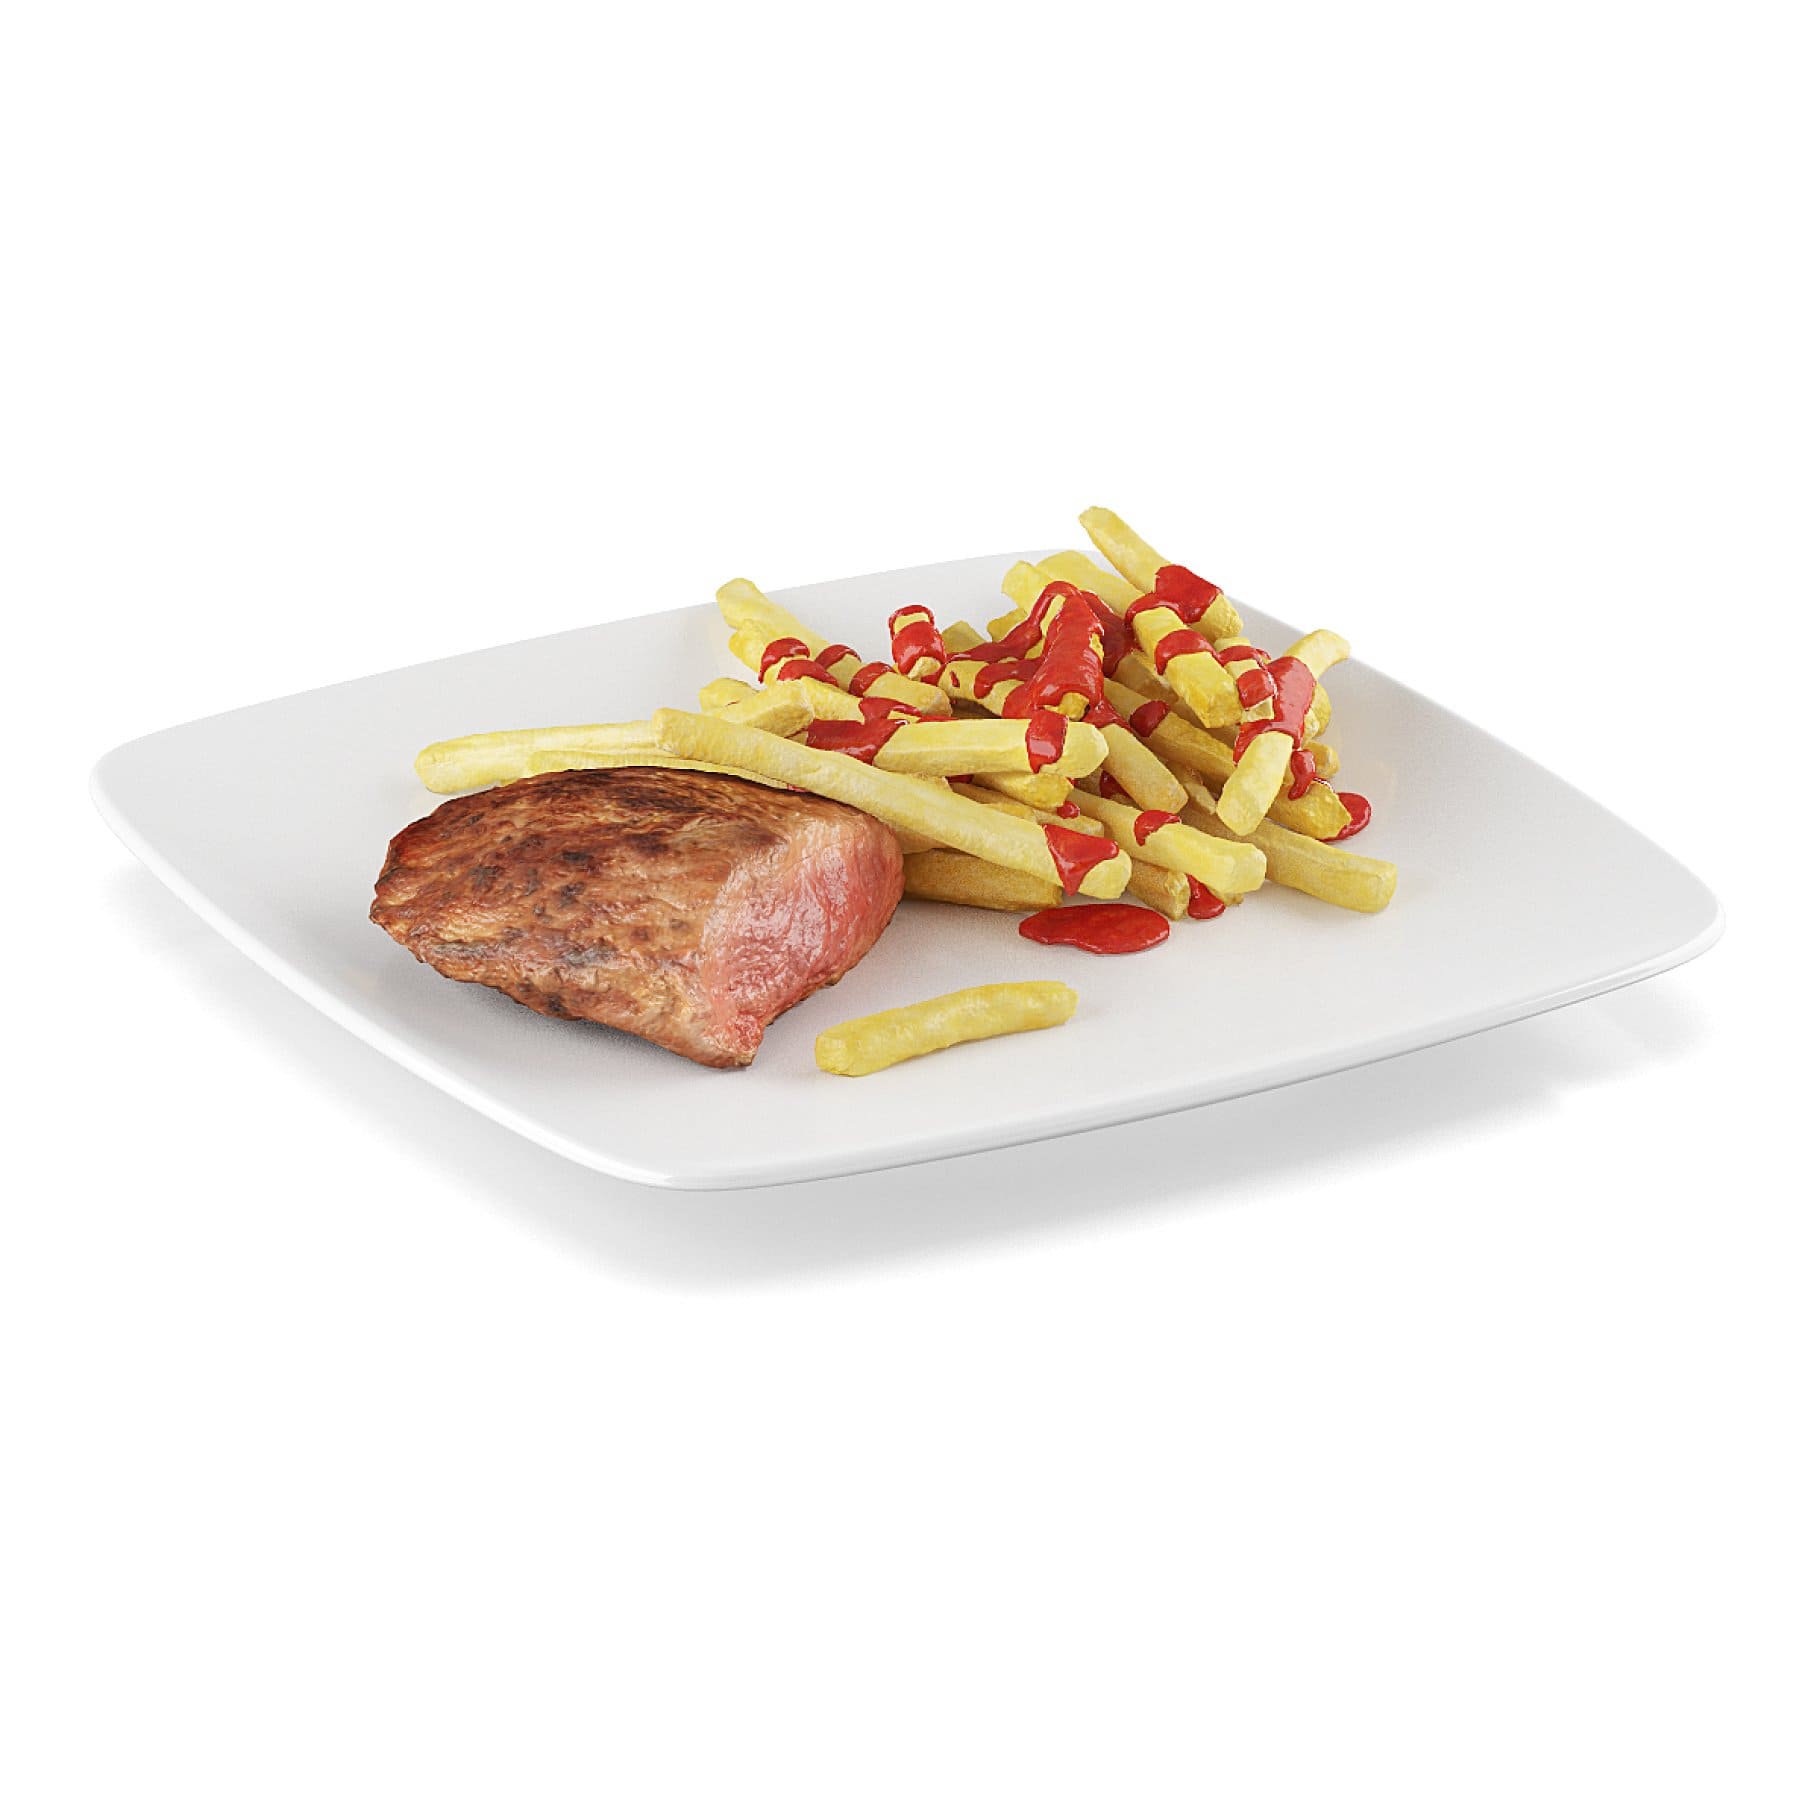 French fries and an appetizing piece of meat lie on a white plate.